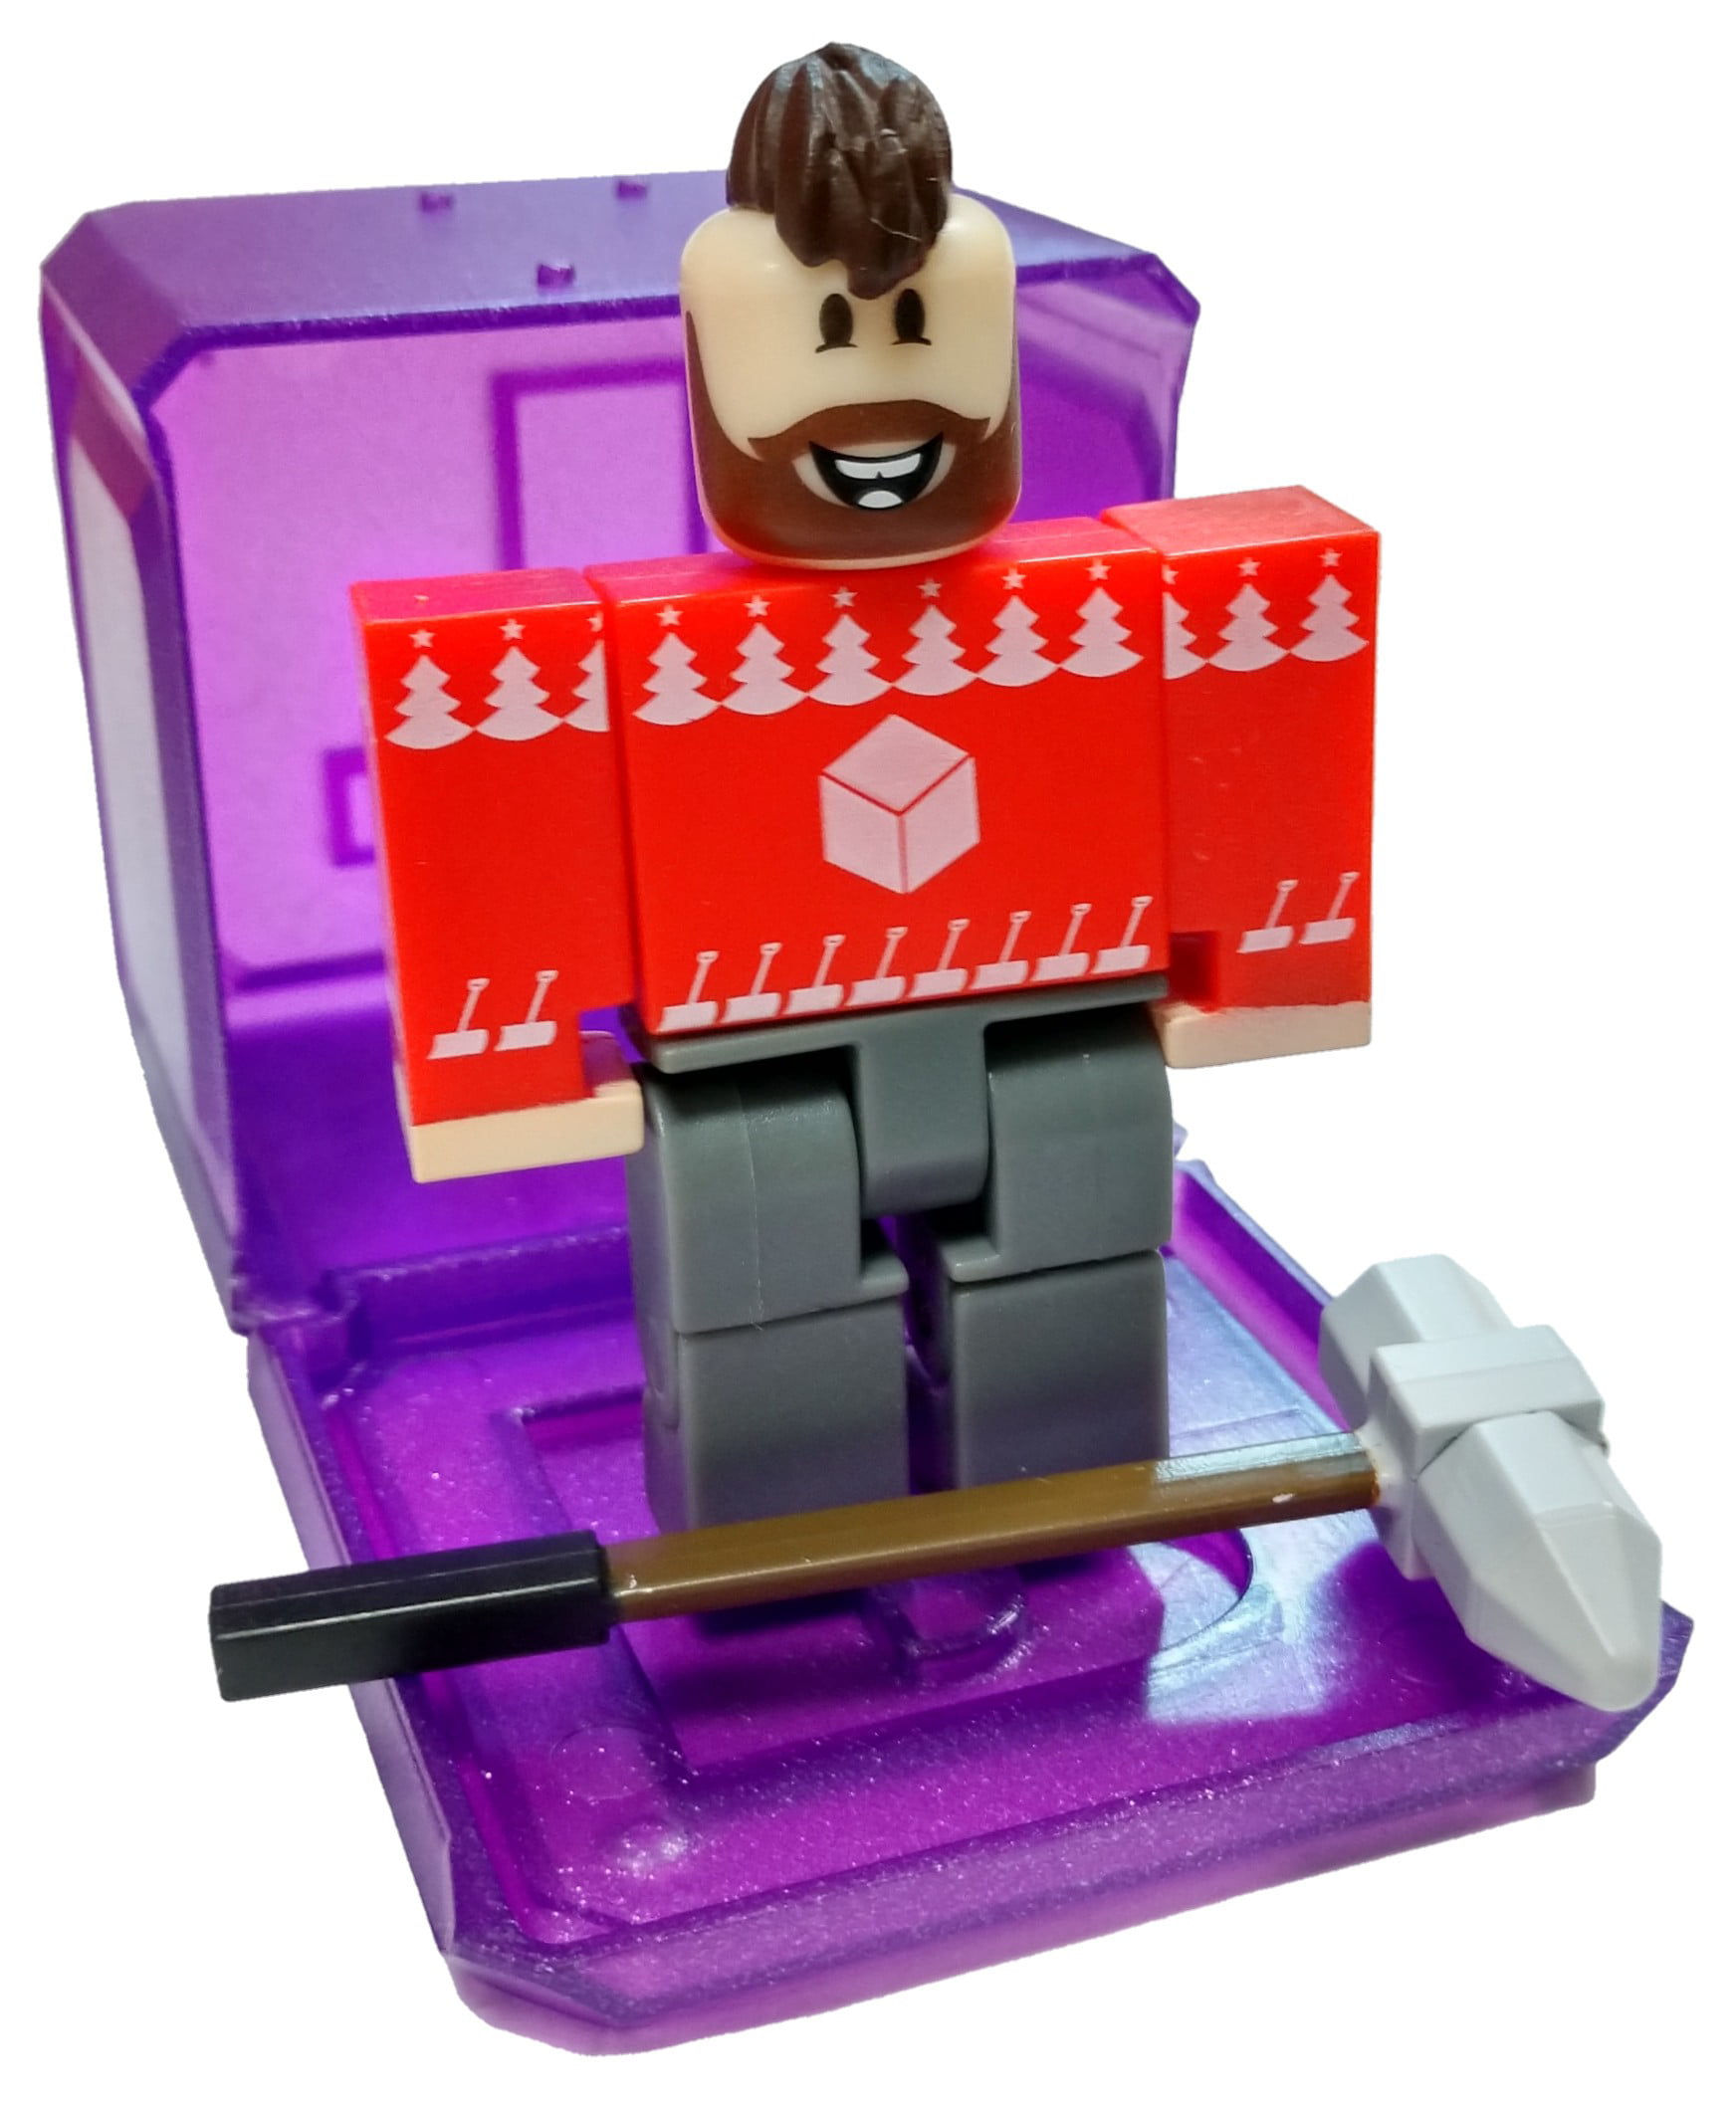 Roblox Celebrity Collection Series 3 Snow Shoveling Simulator Tim Mini Figure With Cube And Online Code No Packaging Walmart Com Walmart Com